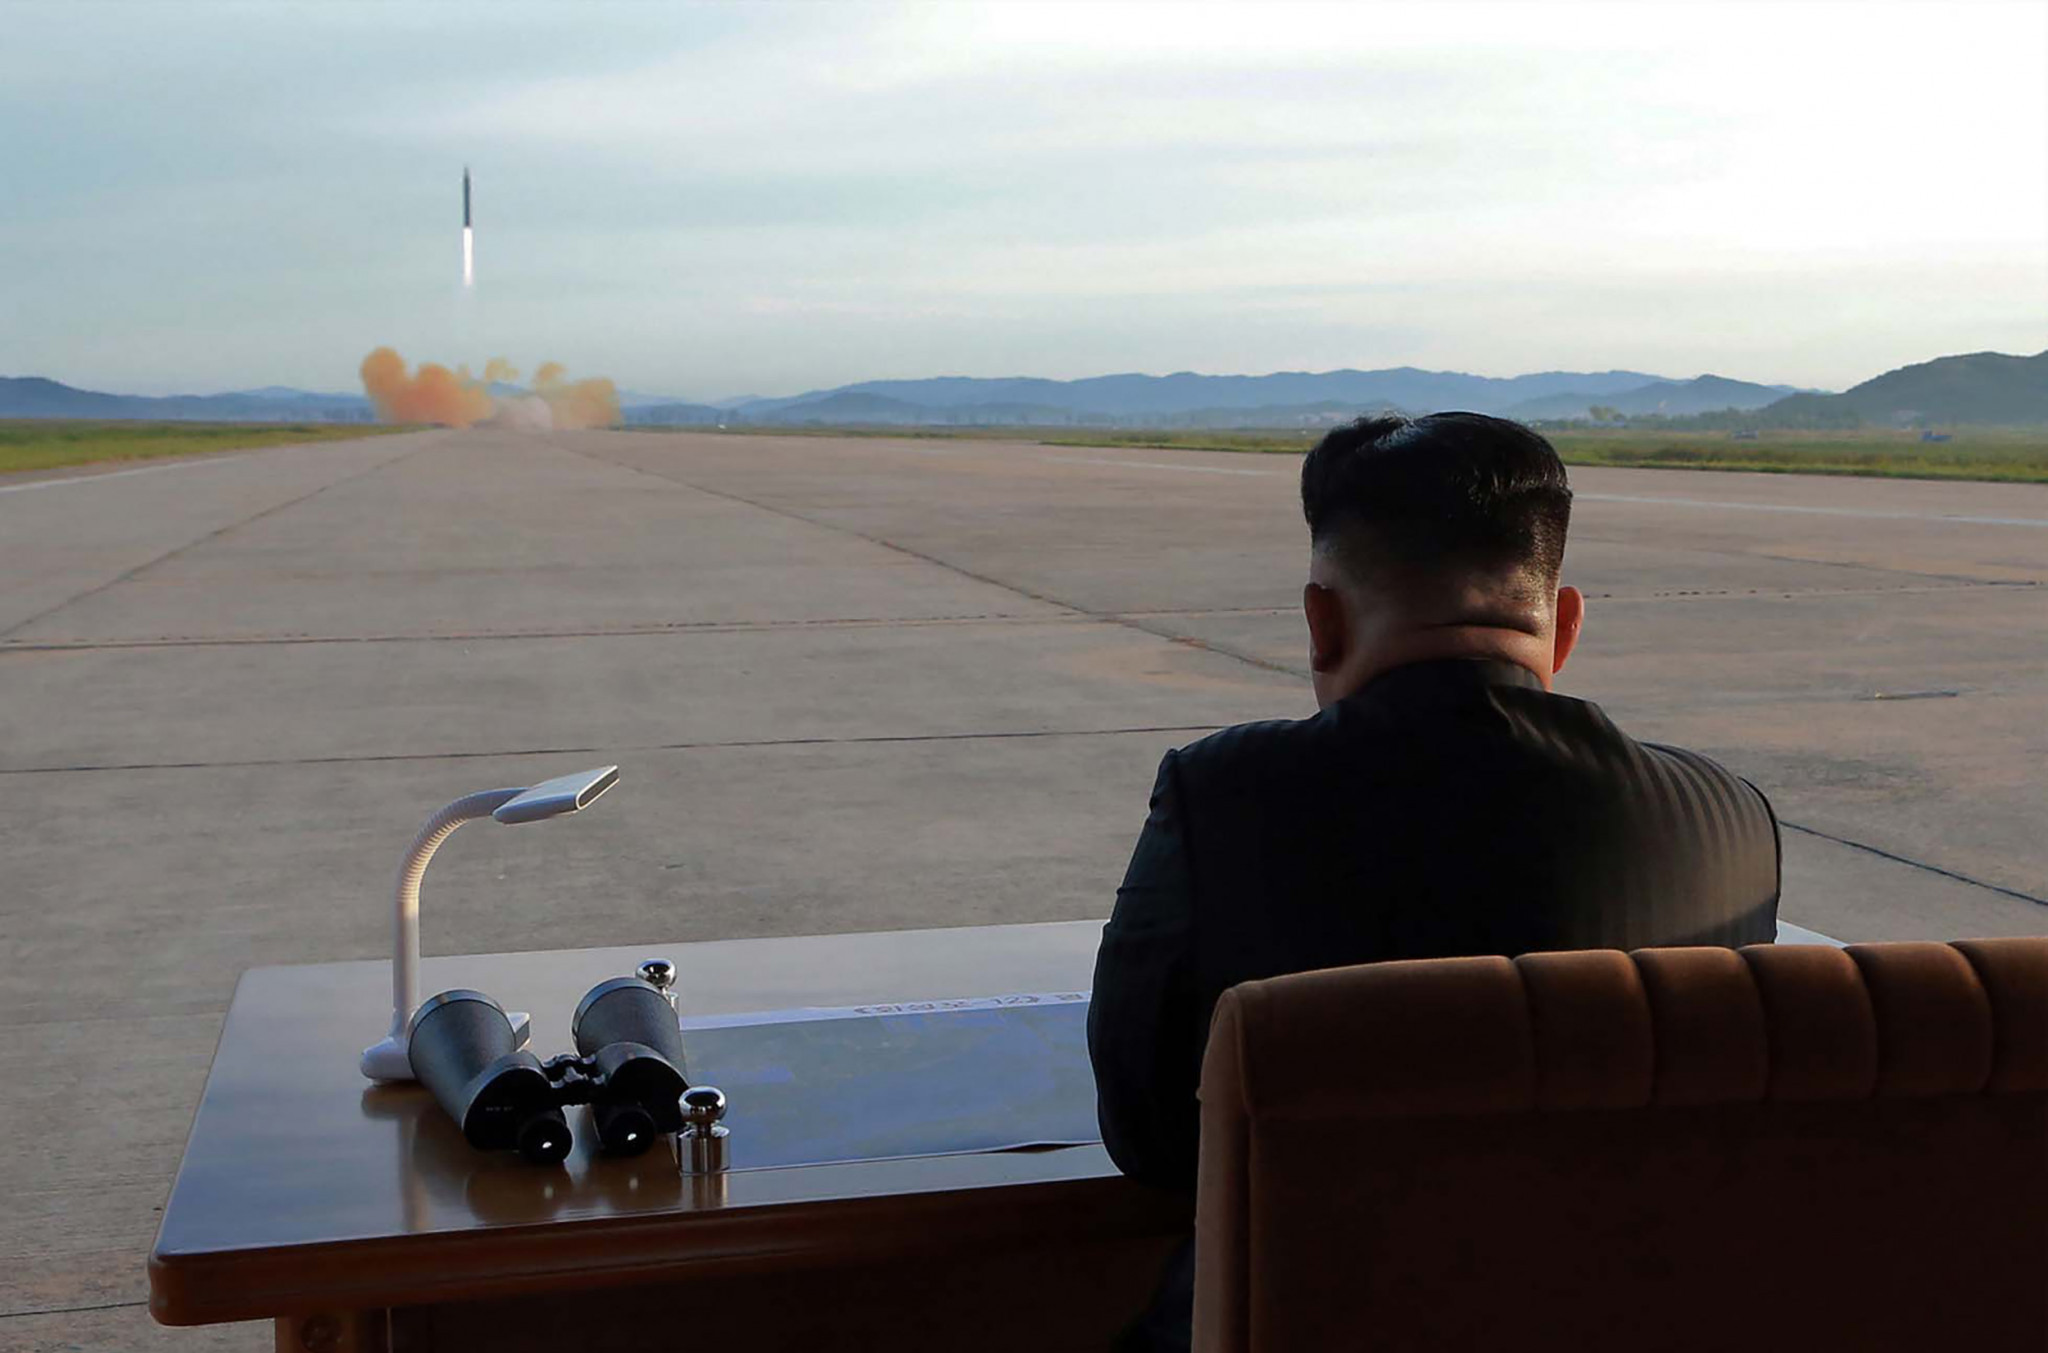 A series of missile tests by North Korea have raised safety concerns in the area ©Getty Images